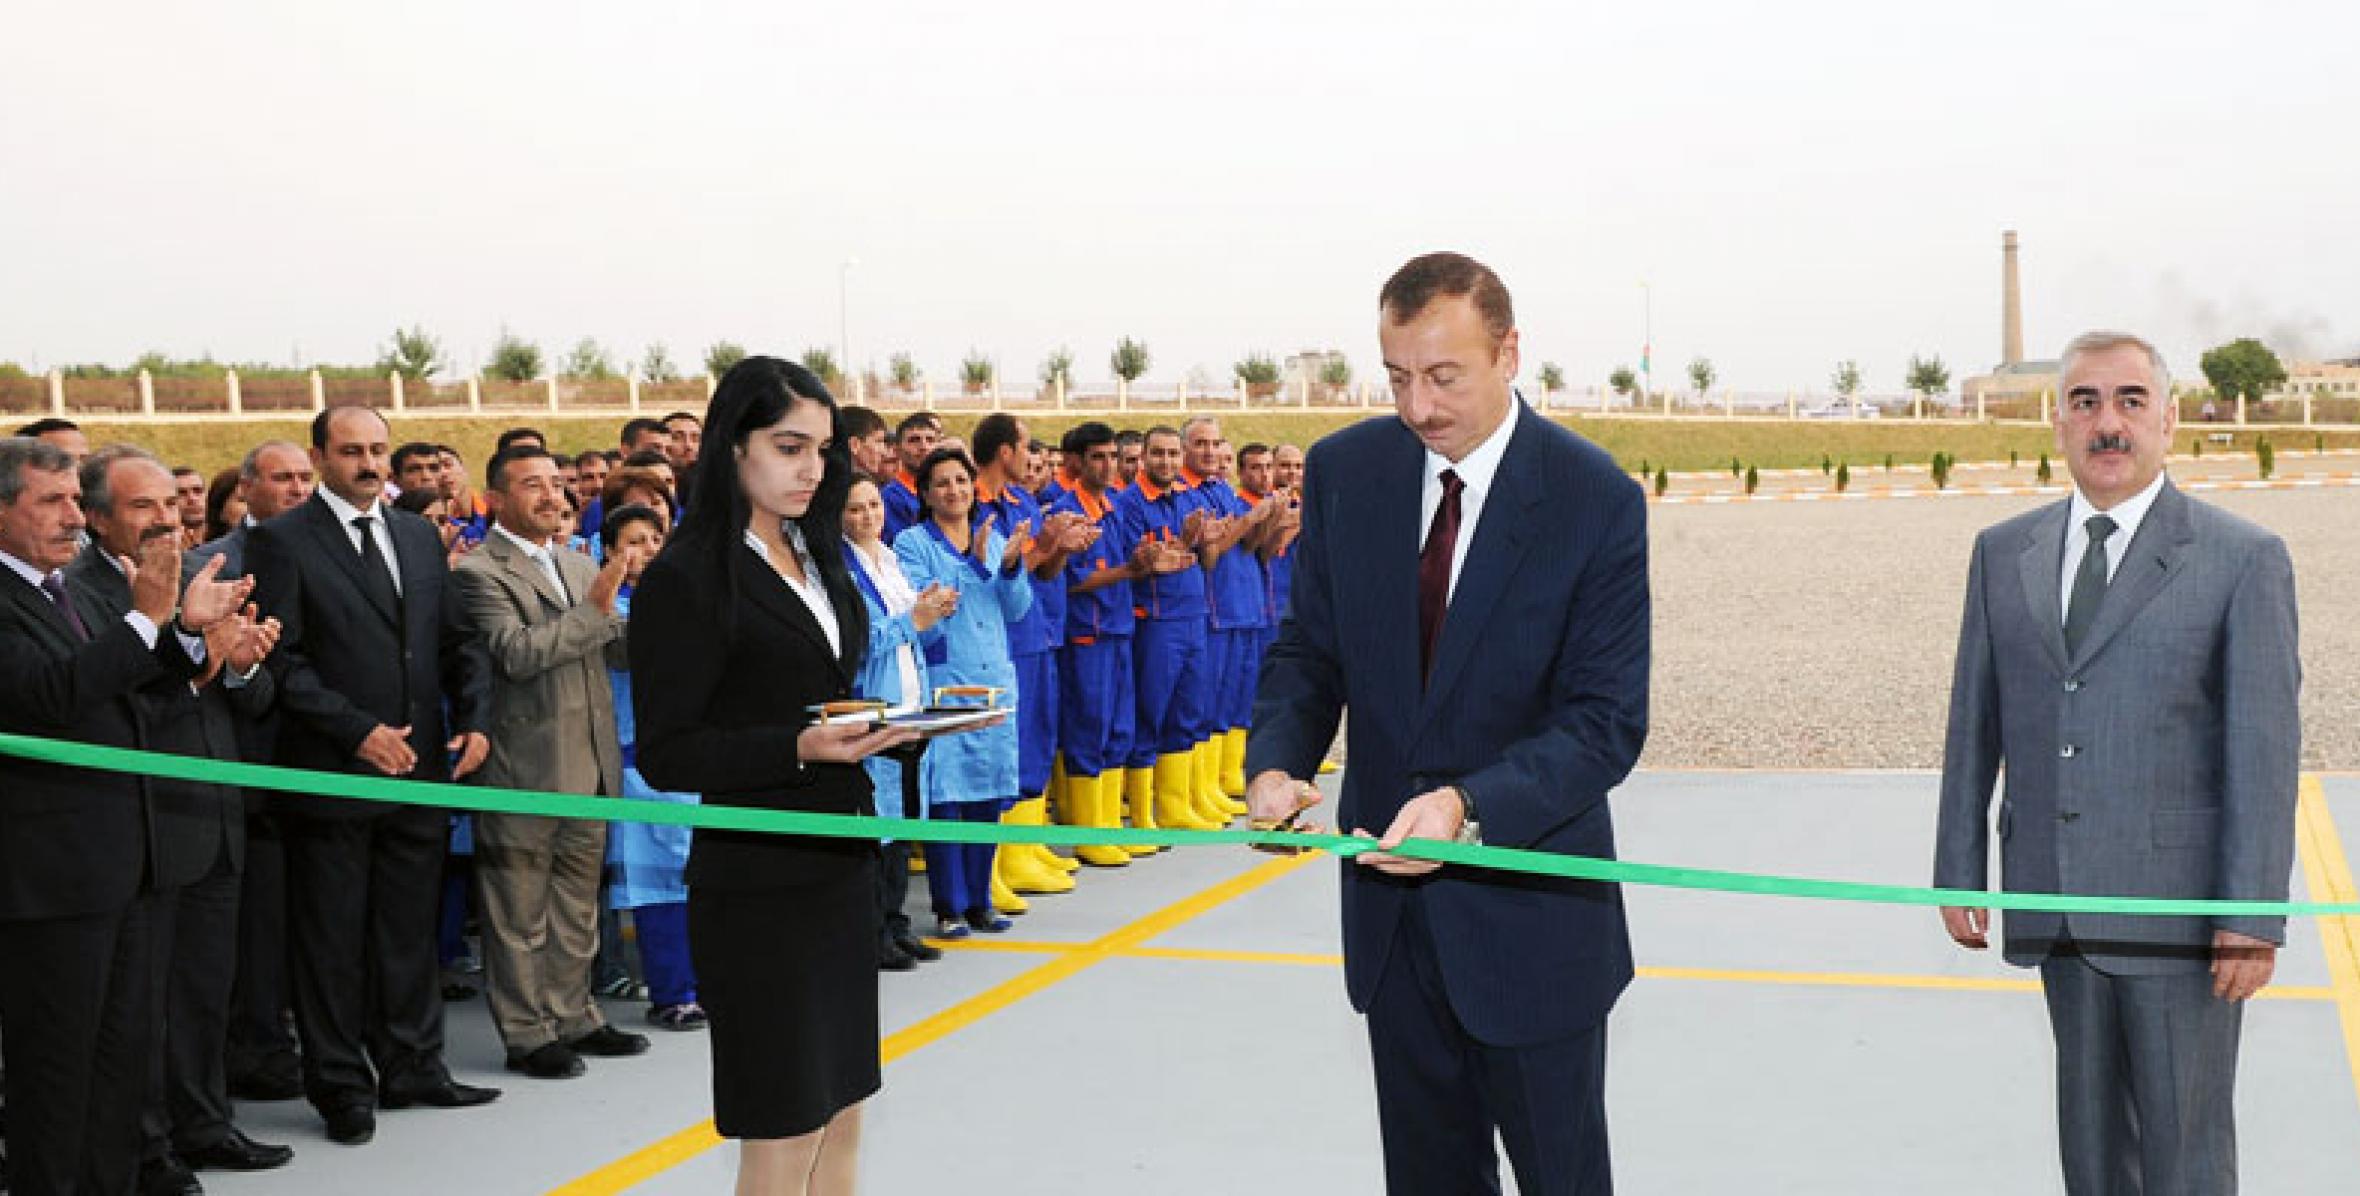 Ilham Aliyev attended the opening ceremony of Gamigaya stone products complex in Nakhchivan